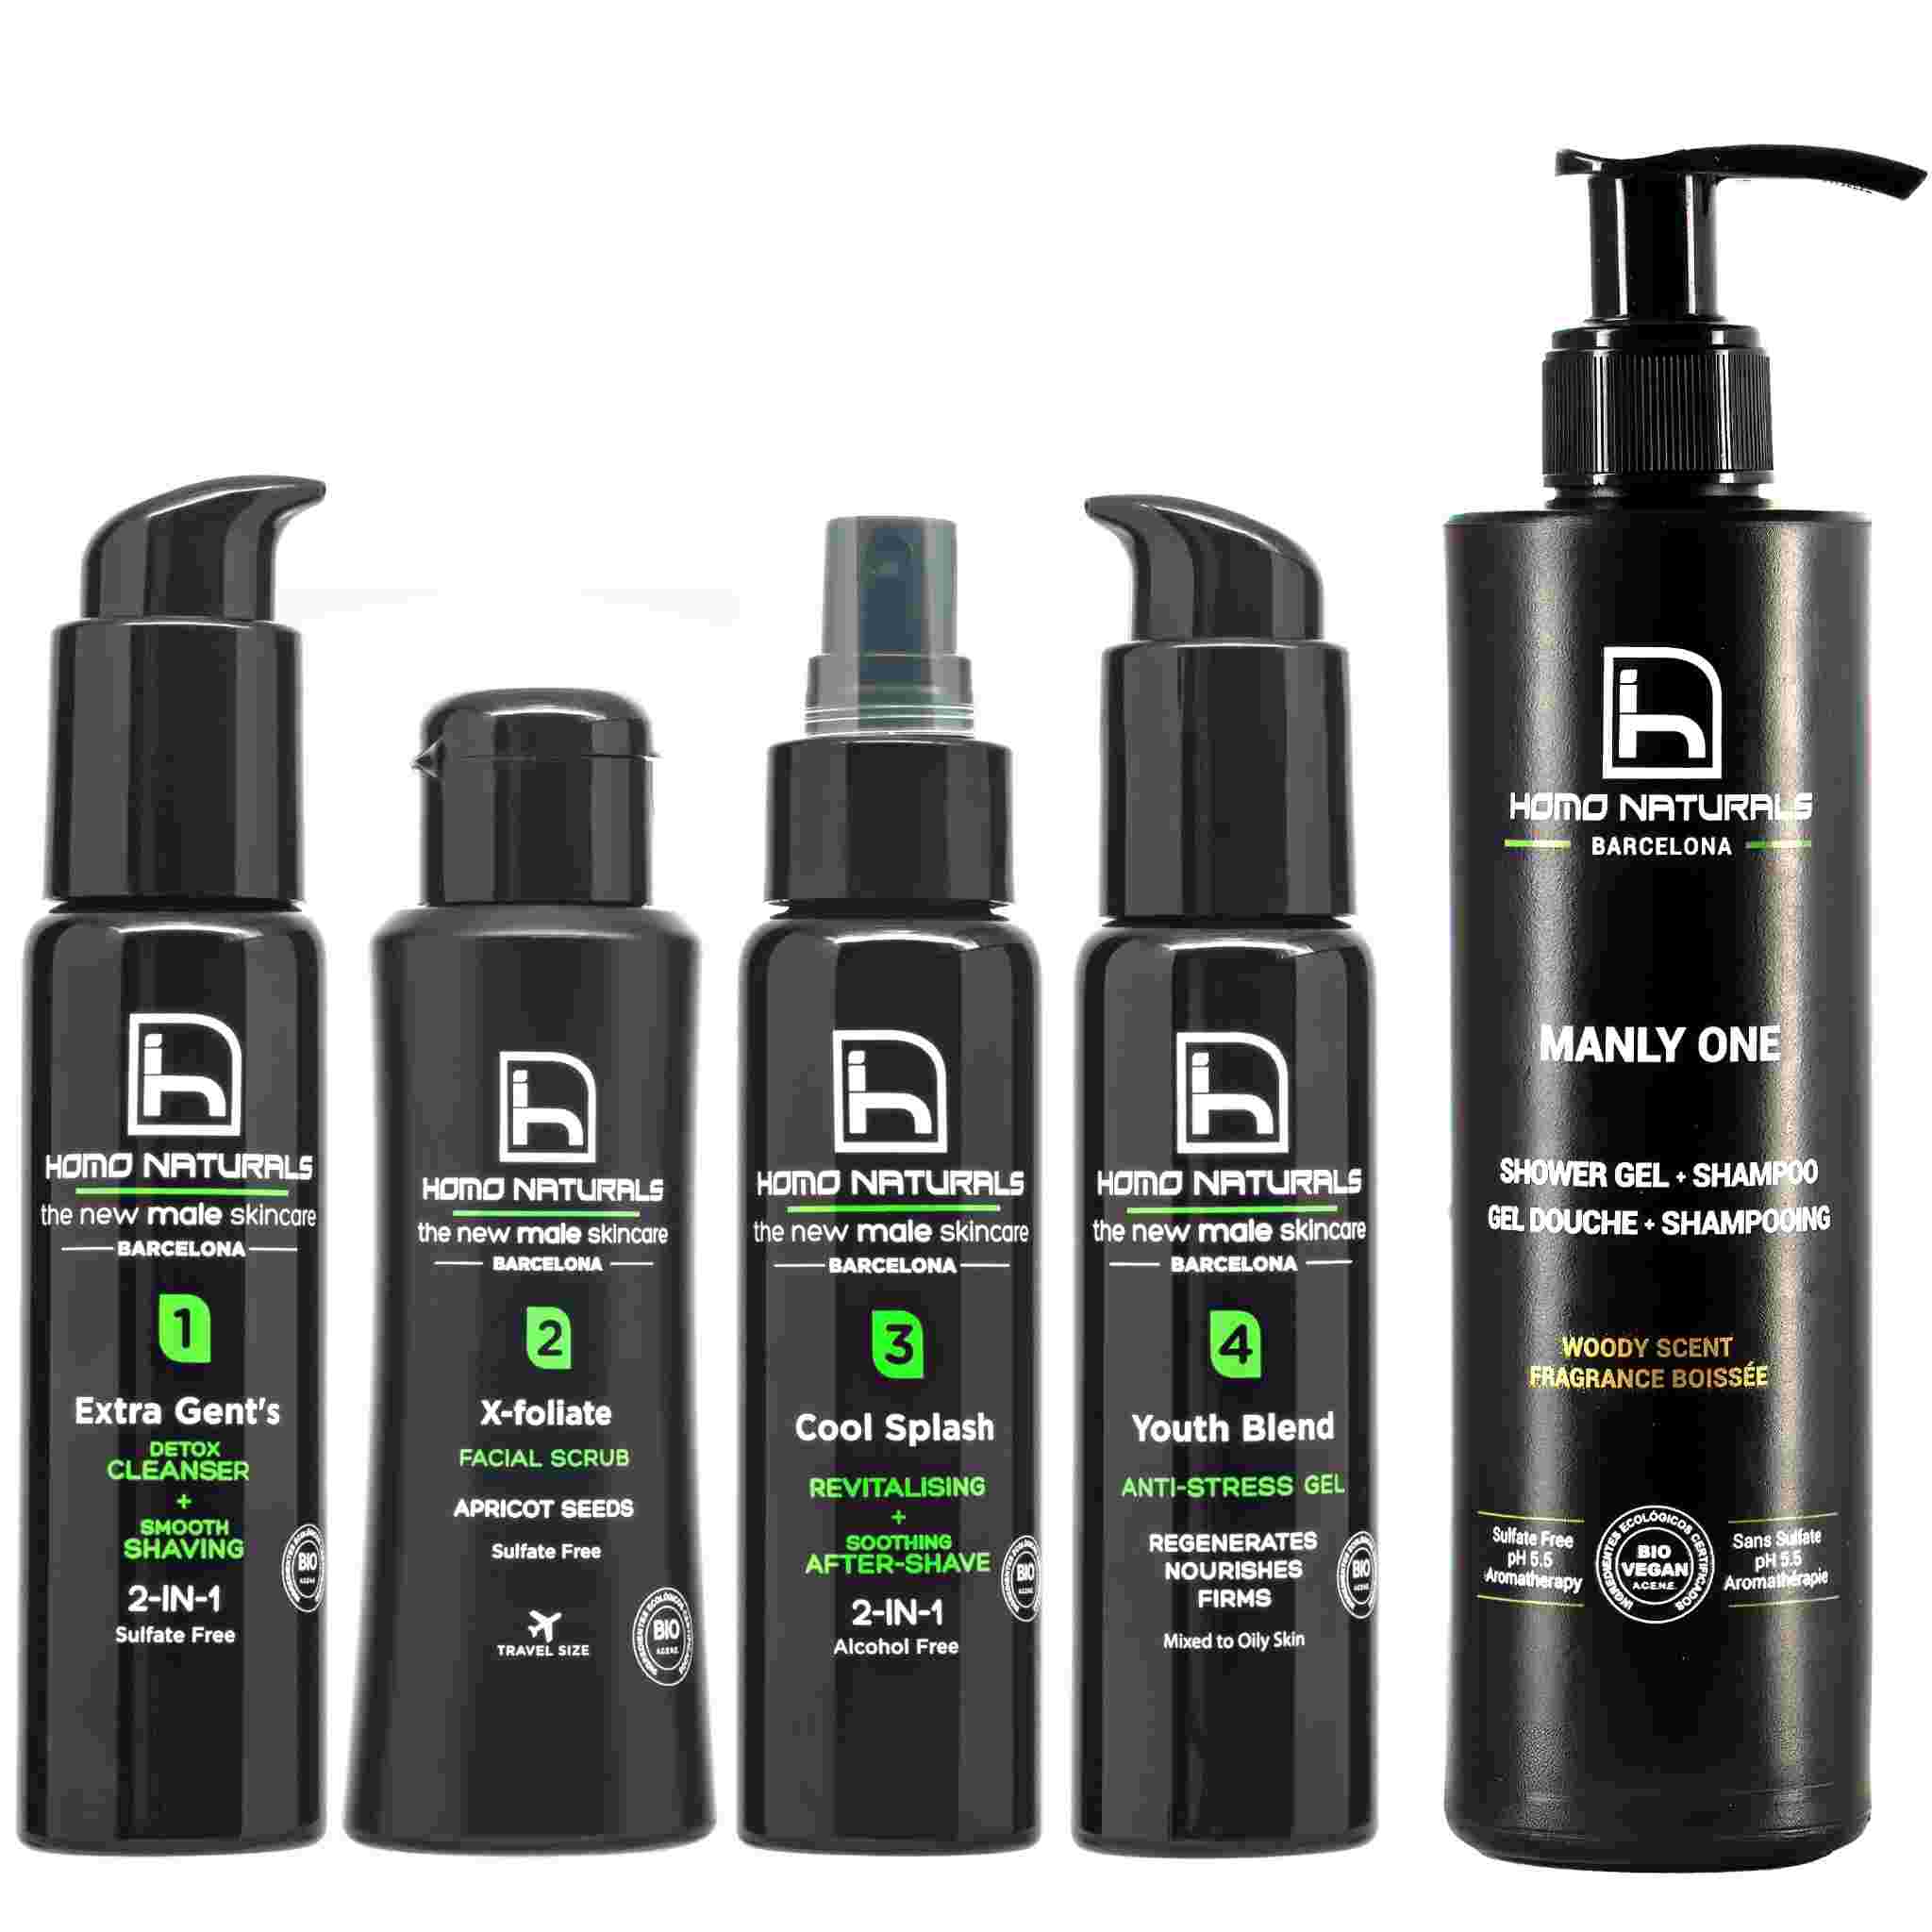 Men's facial care kit with anti-wrinkle cream for oily skin and shower gel.